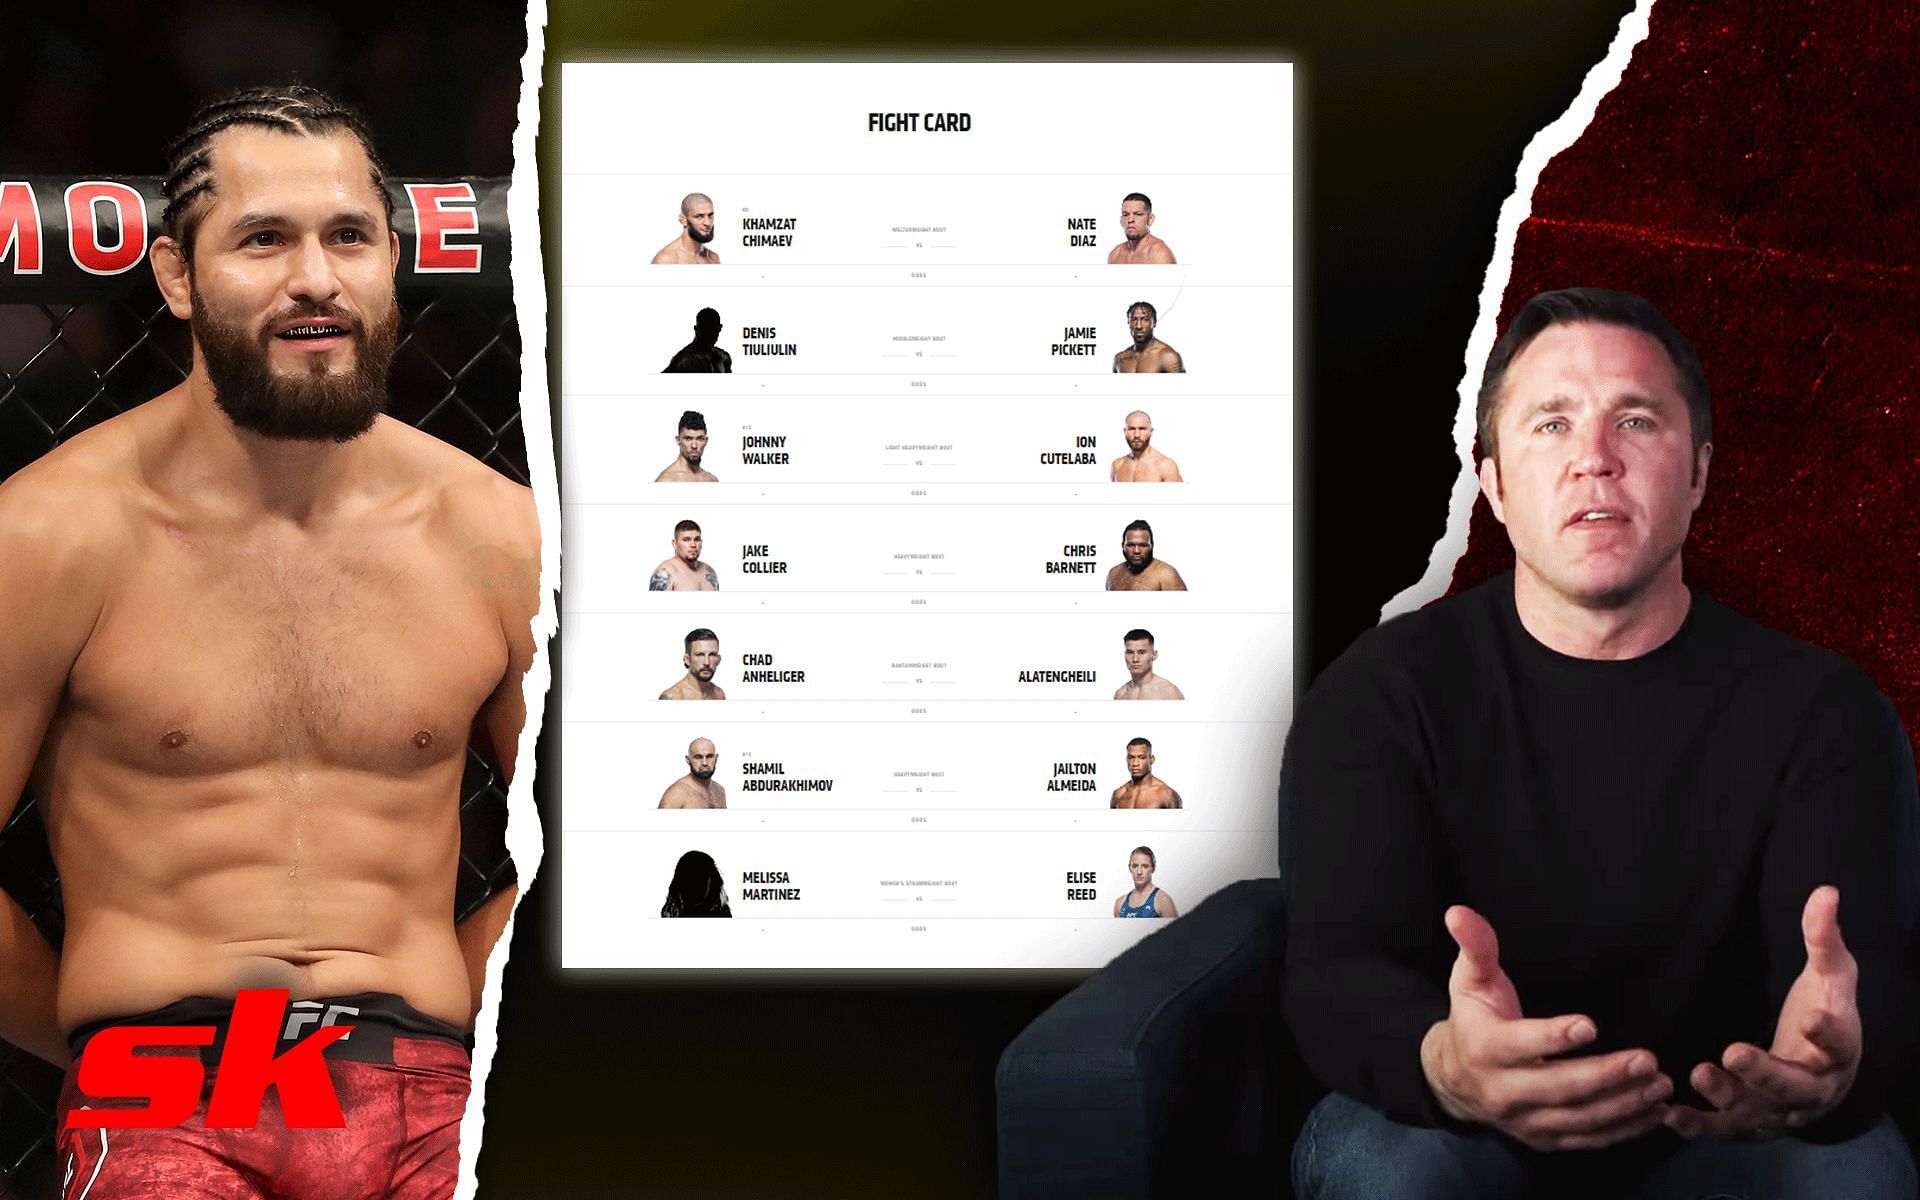 Chael Sonnen is disappointed with the card for UFC 279 [Sonnen image via Chael Sonnen on YouTube | Masvidal image via Getty | UFC 279 poster via ufc.com]